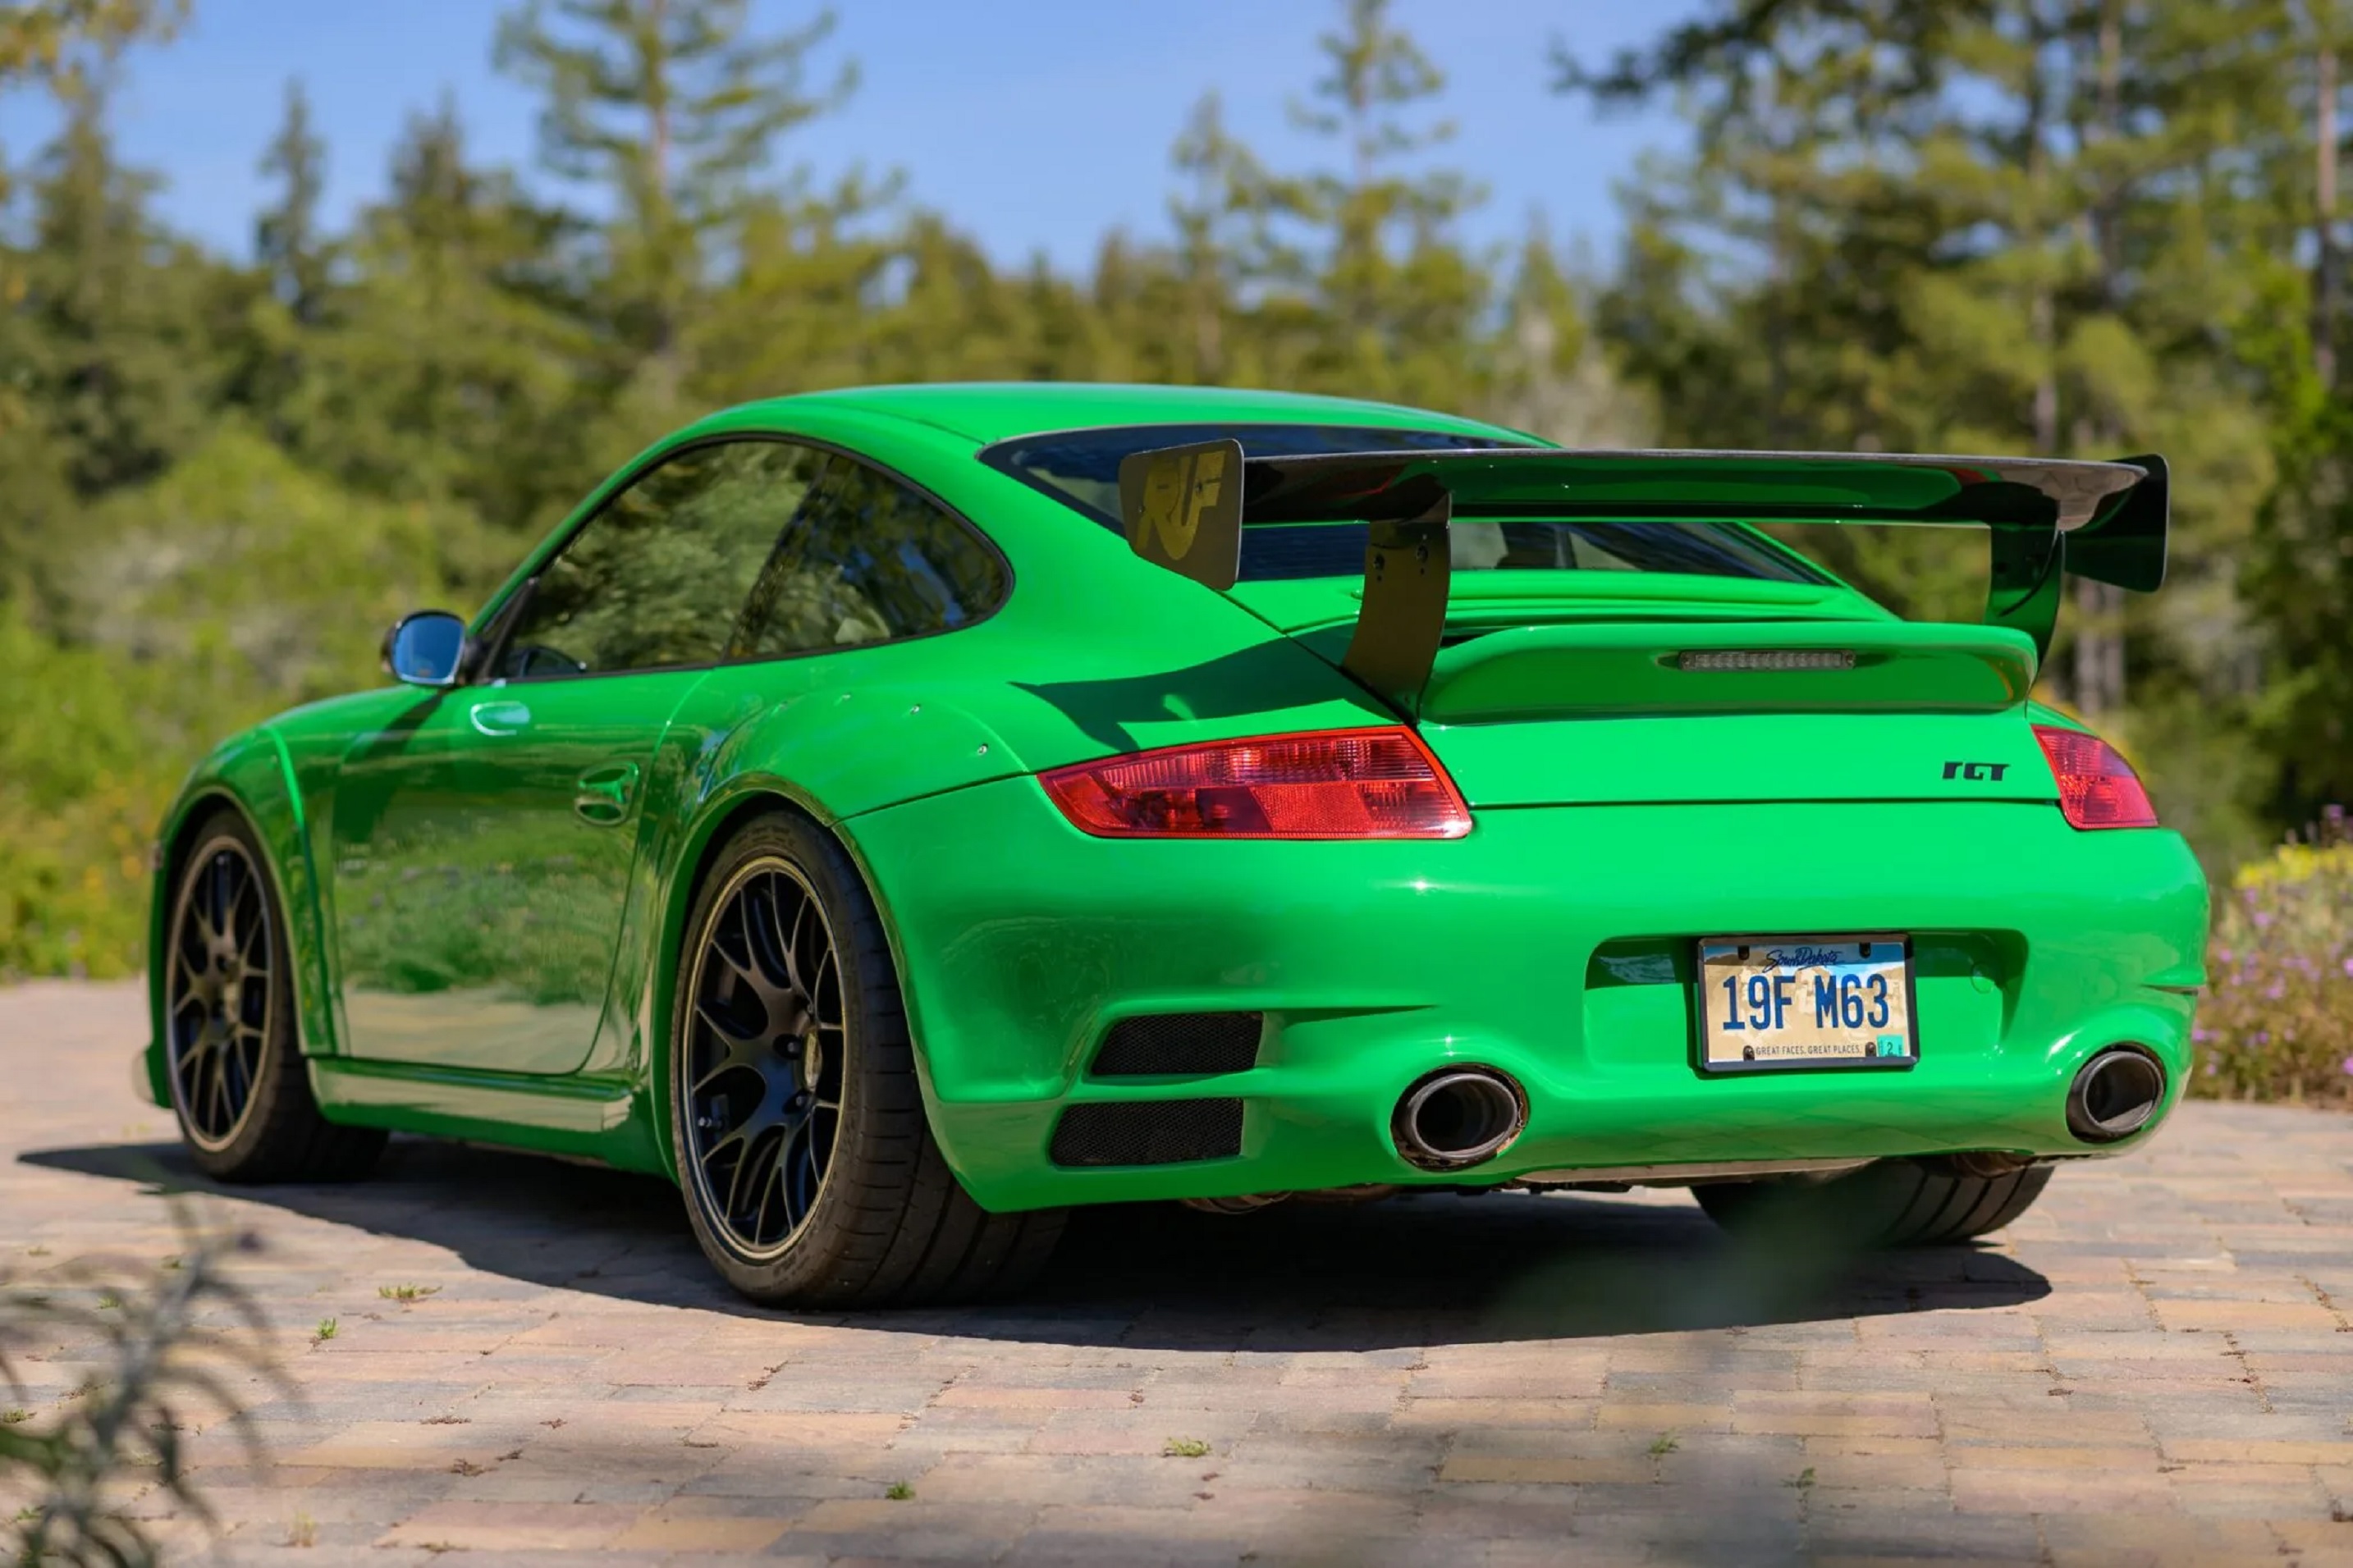 The rear 3/4 view of a Viper Green Sharkwerks-modified 2007 RUF RGT in a desert parking lot